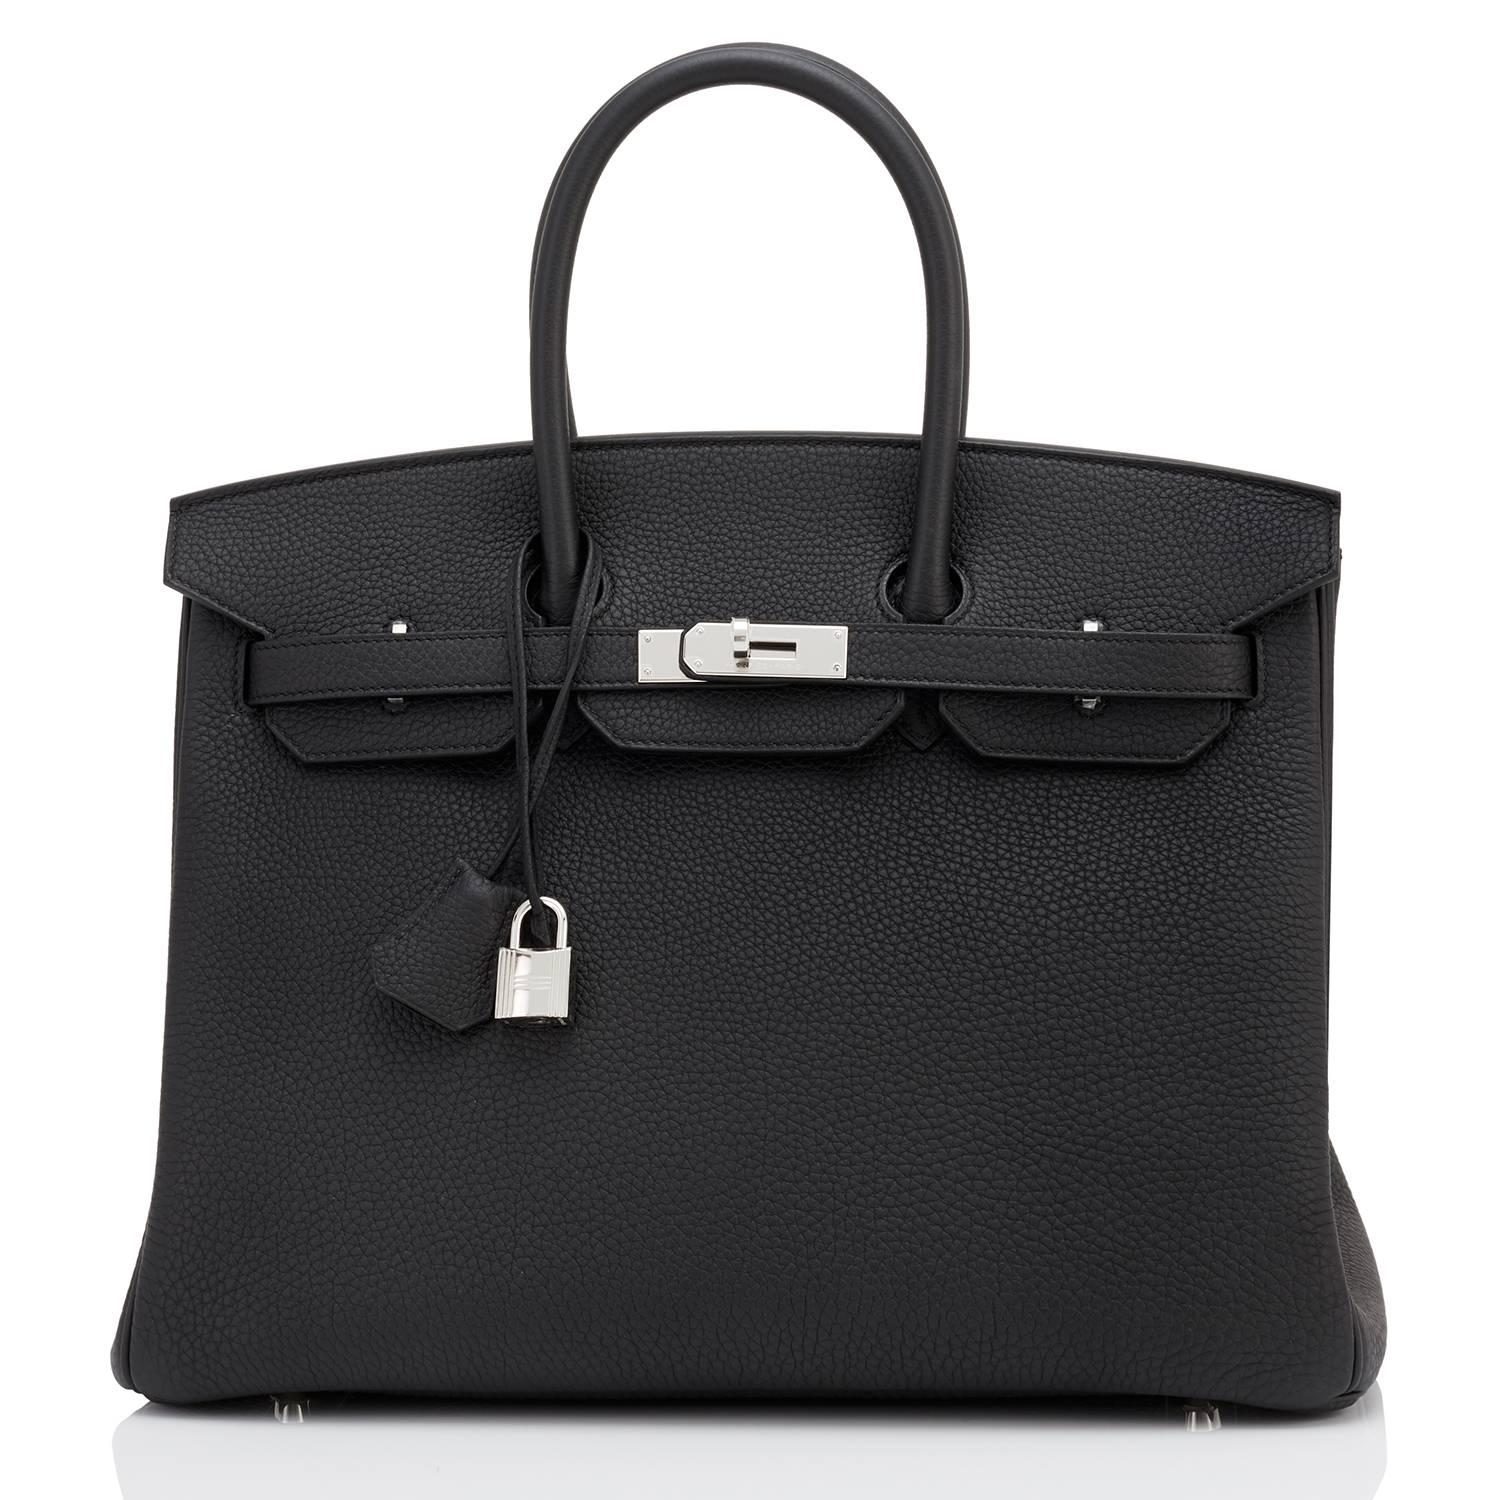 Hermes Black Togo 35cm Birkin Palladium Hardware Bag CStamp
Brand New in Box.  Store Fresh.  Pristine Condition (with plastic on hardware)
Just purchased from store; bag bears new 2018 interior C stamp! 
Perfect gift! Comes with lock, keys,